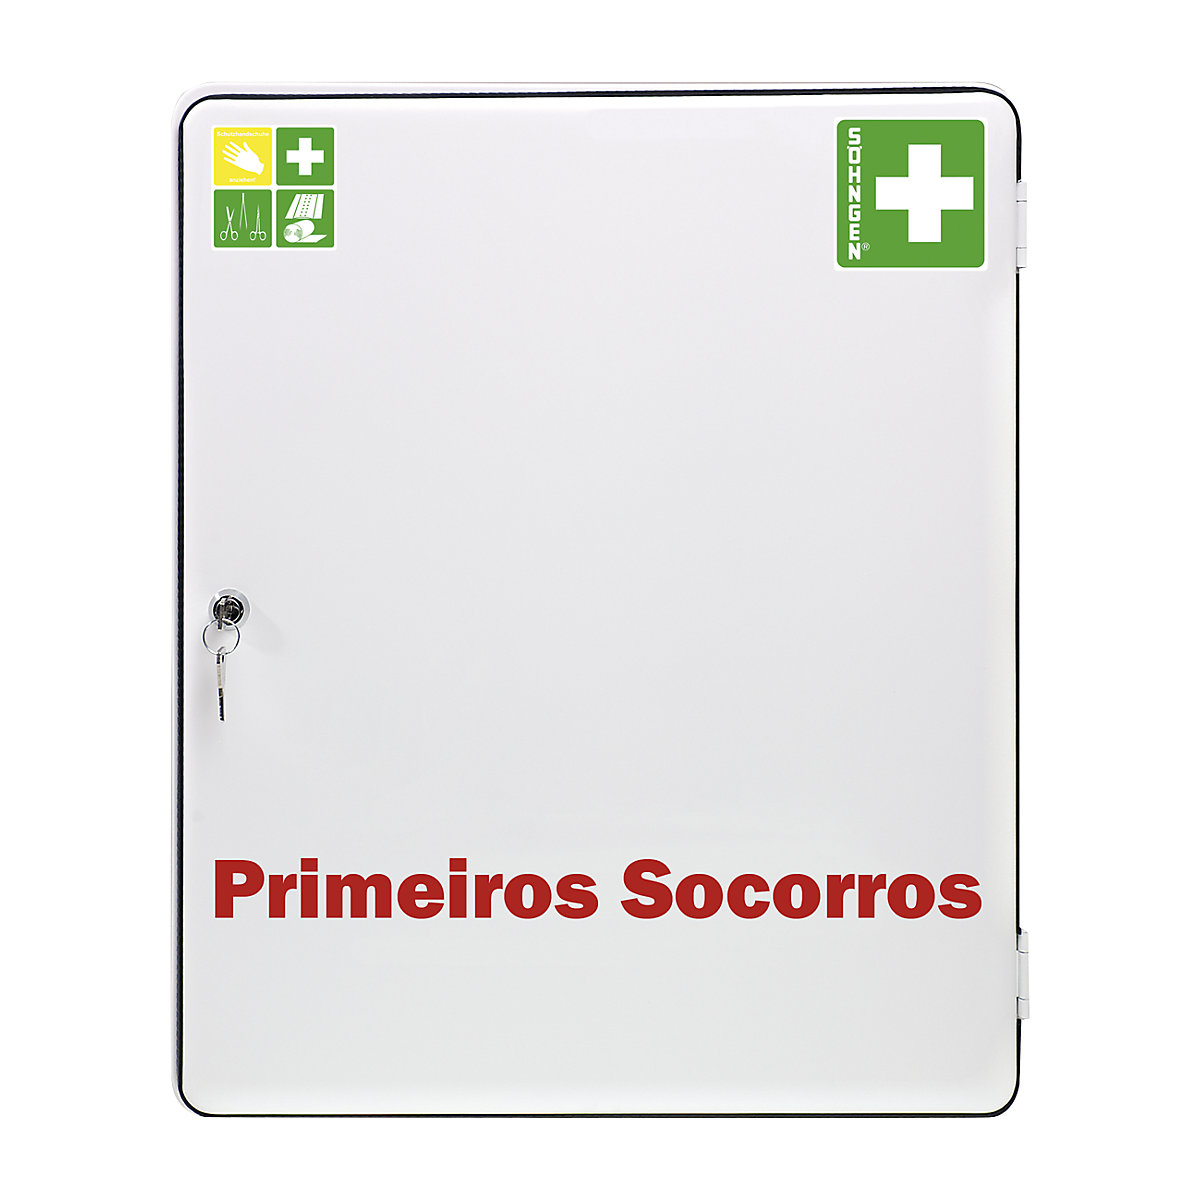 First aid cupboard, DIN 13169 – SÖHNGEN (Product illustration 15)-14